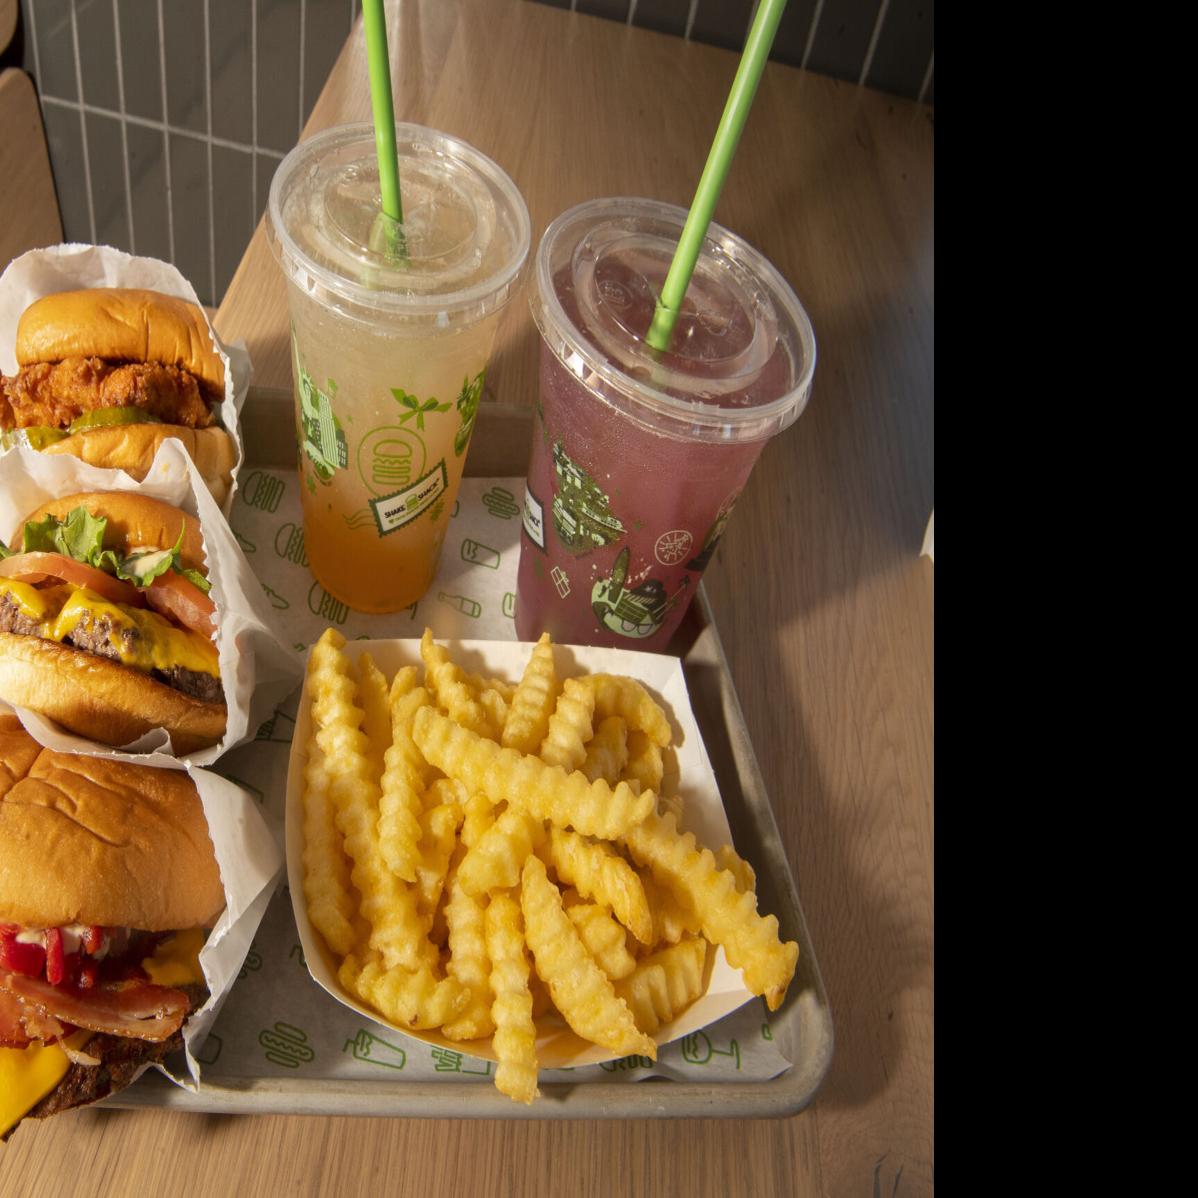 Garden State Plaza Shake Shack is now open